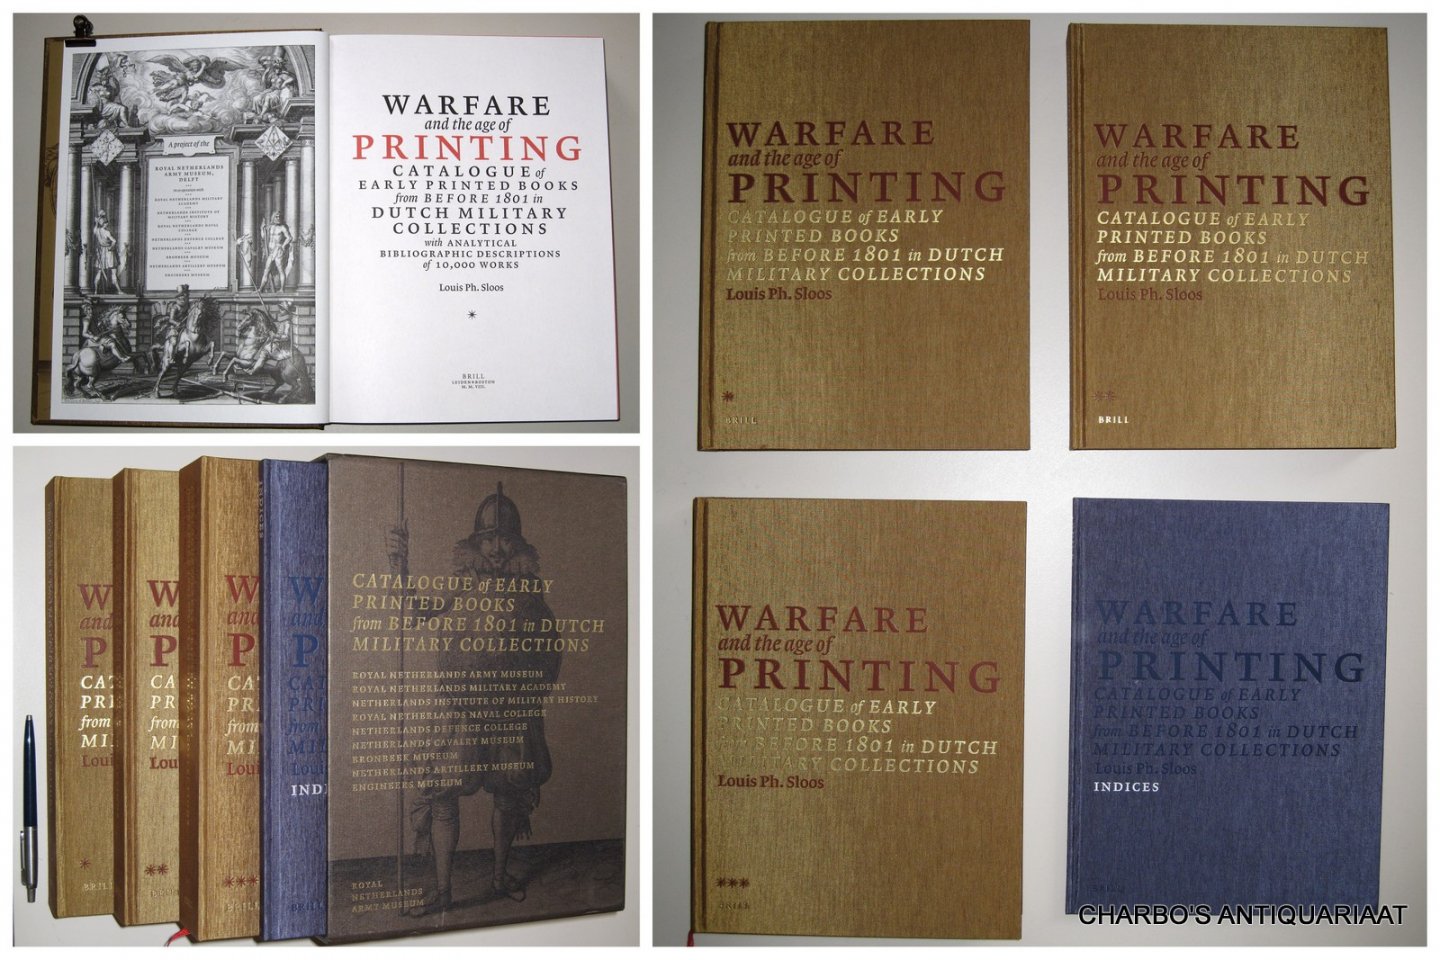 SLOOS, LOUIS PH., - Warfare and the age of printing. Catalogue of early printed books from before 1801 in Dutch military collections with analytical bibliographic descriptions of 10,000 works